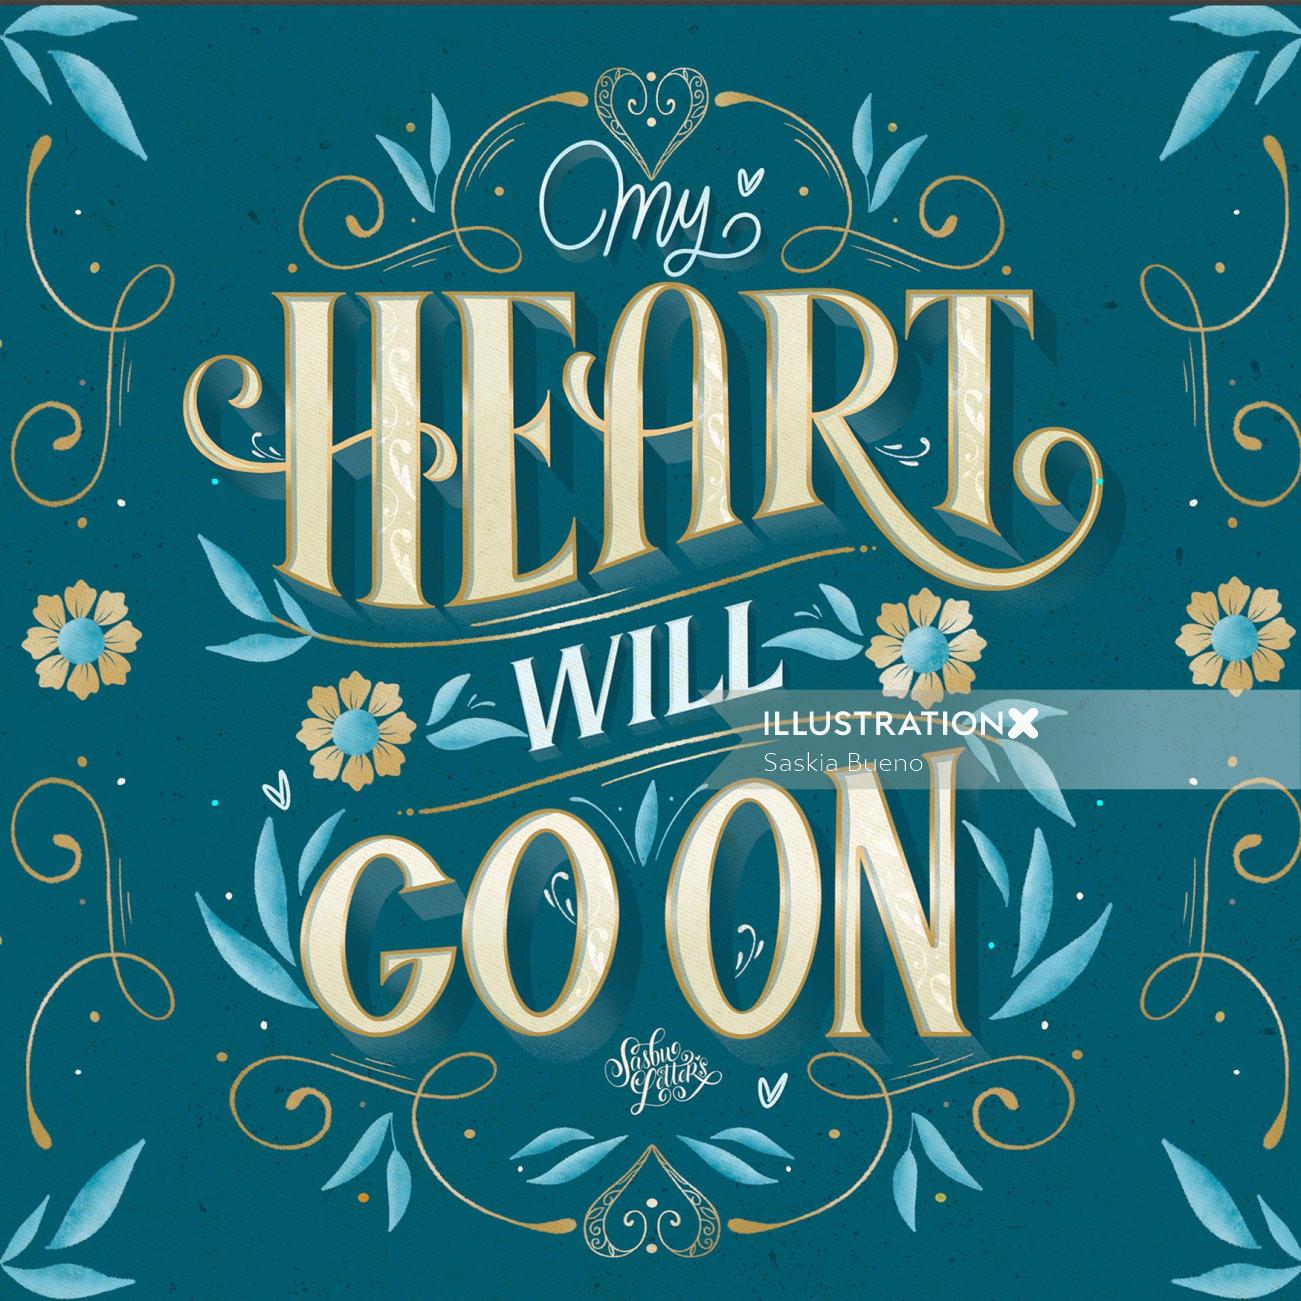 Typography design of My Heart Will Go On